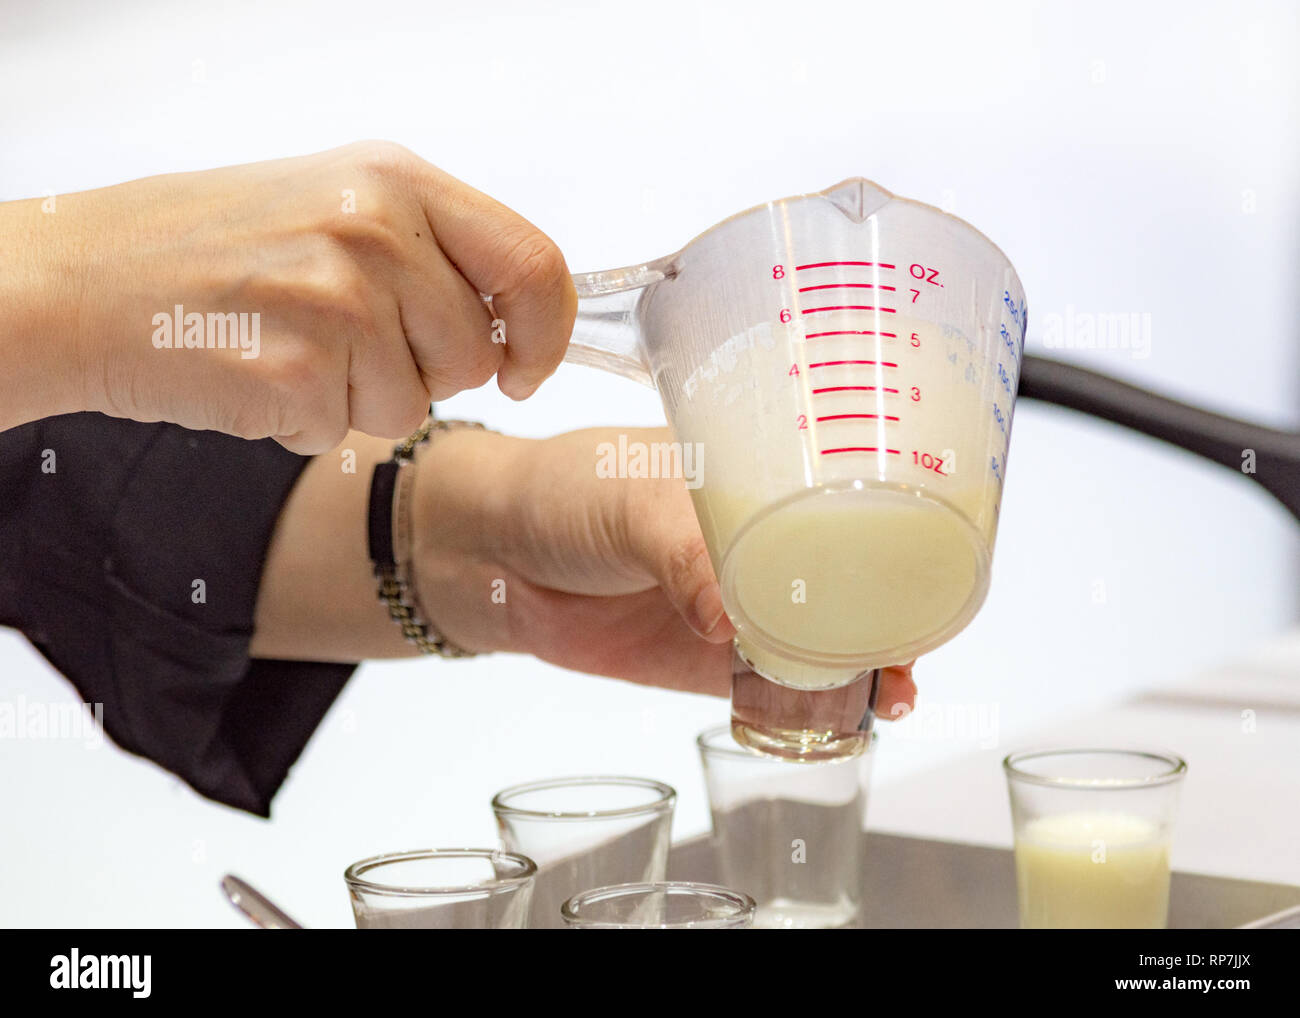 Measuring out milk in a measuring jug for cooking or test Stock Photo